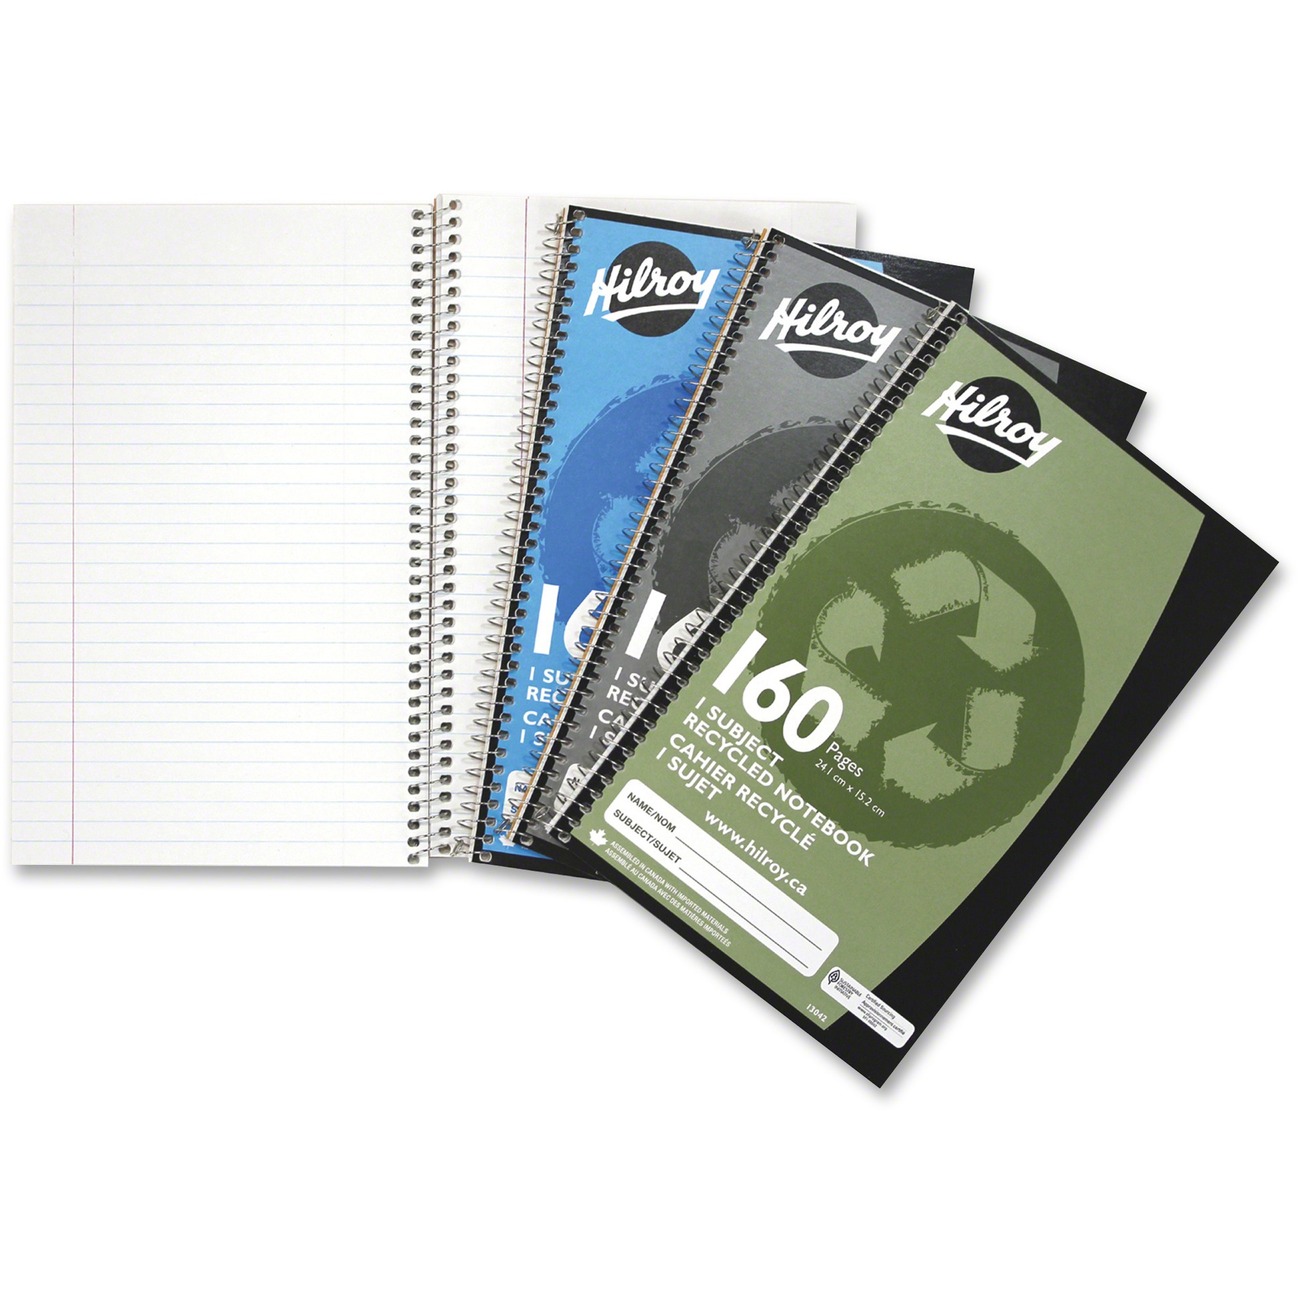 Kamloops Office Systems Office Supplies Paper And Pads Notebooks Pads And Filler Paper 8396